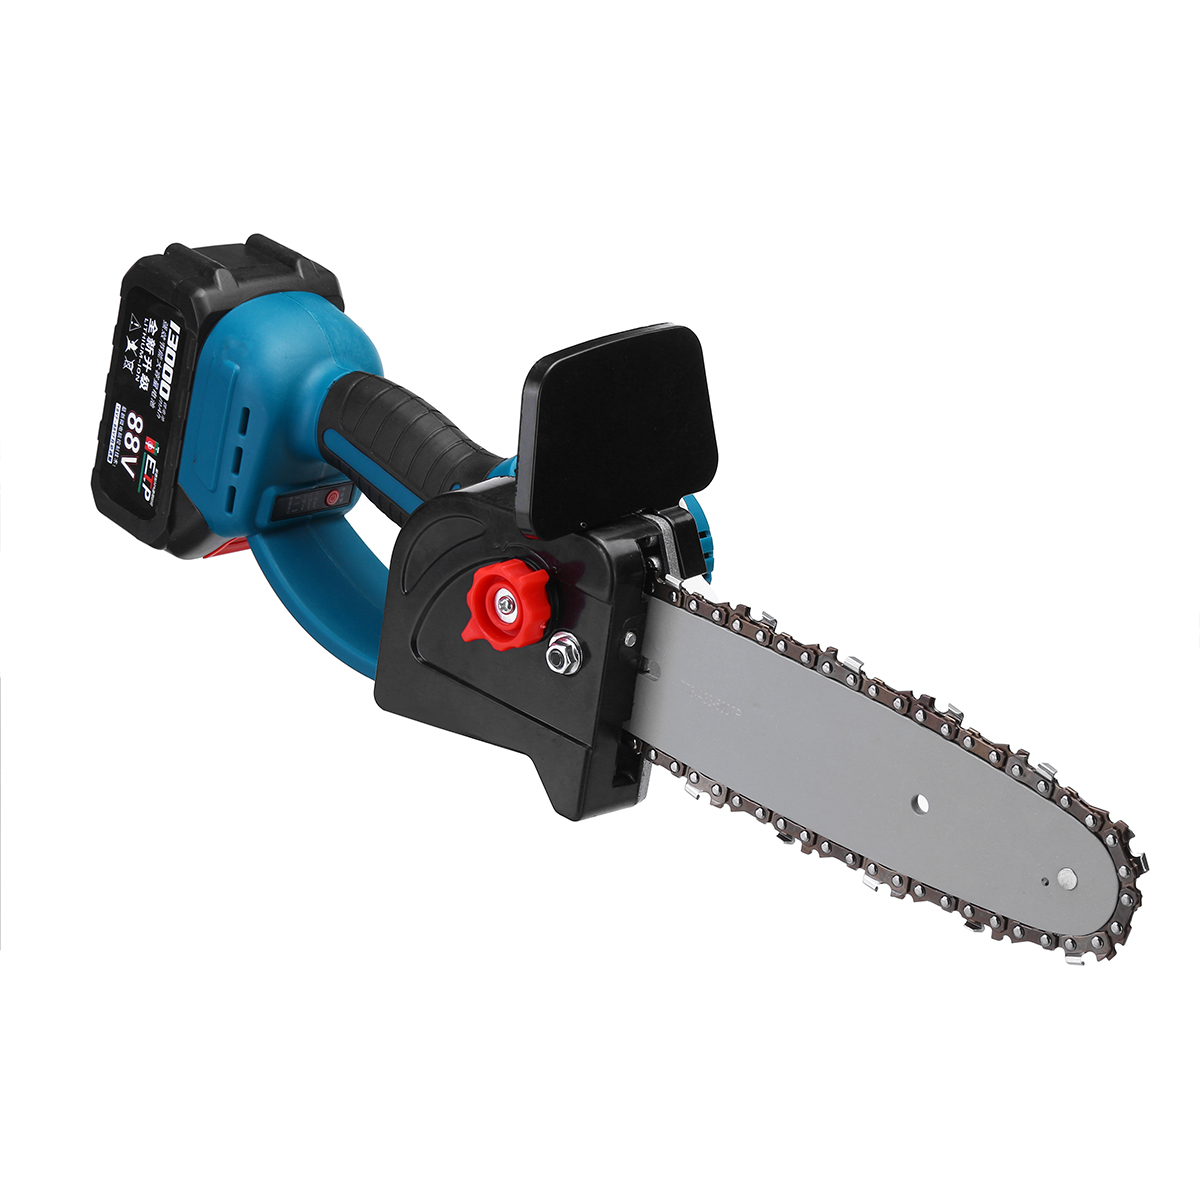 88V-1200W-8-Inch-Electric-Cordless-Chain-Saw-Woodworking-Saw-Wood-Cutter-with-Battery-1790807-8